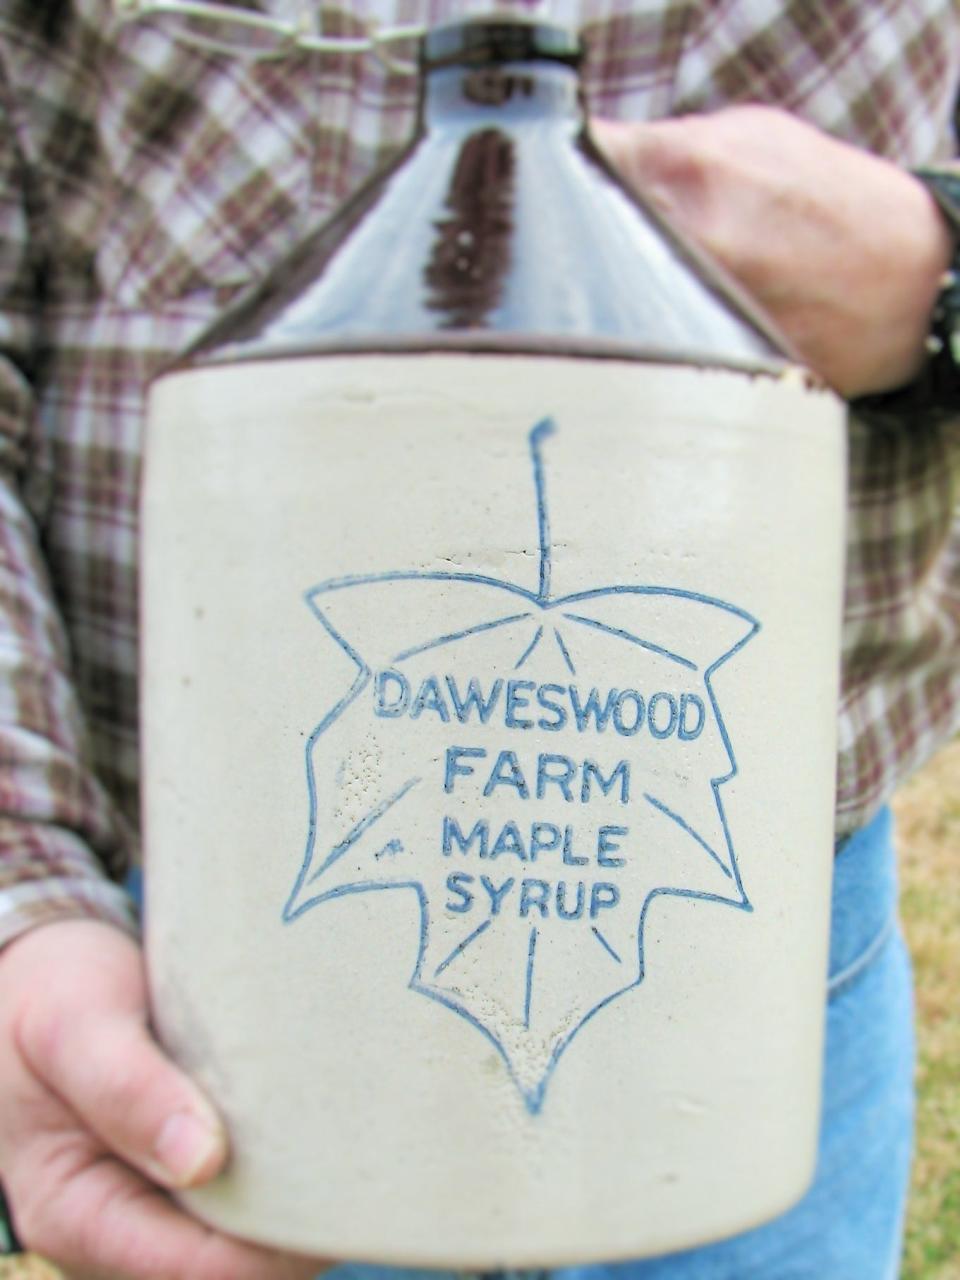 Guests can learn how maple syrup is made on Saturday and Sunday during a guided walking tour at The Dawes Arboretum in Newark.